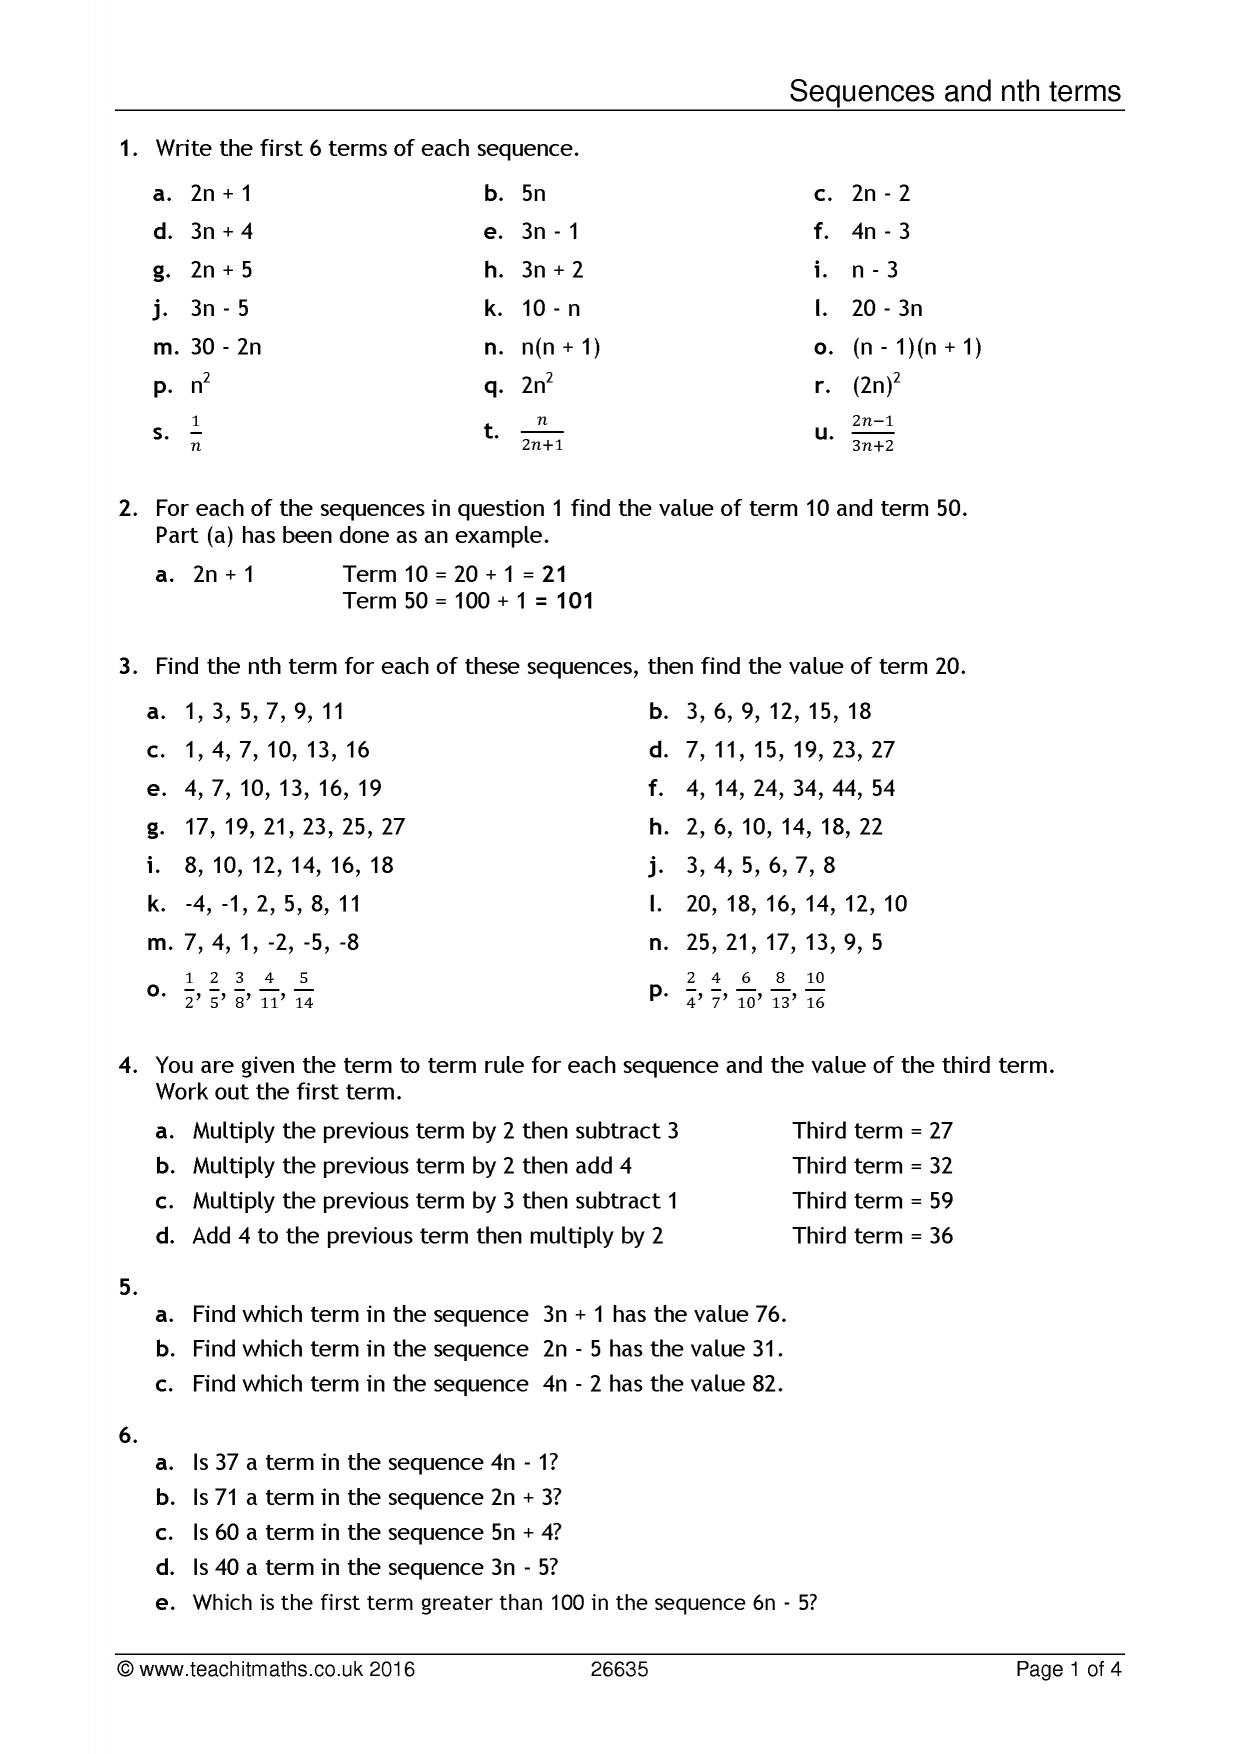 Sequences and nth terms worksheet [PDF] - Teachit Maths With Sequences And Series Worksheet Answers